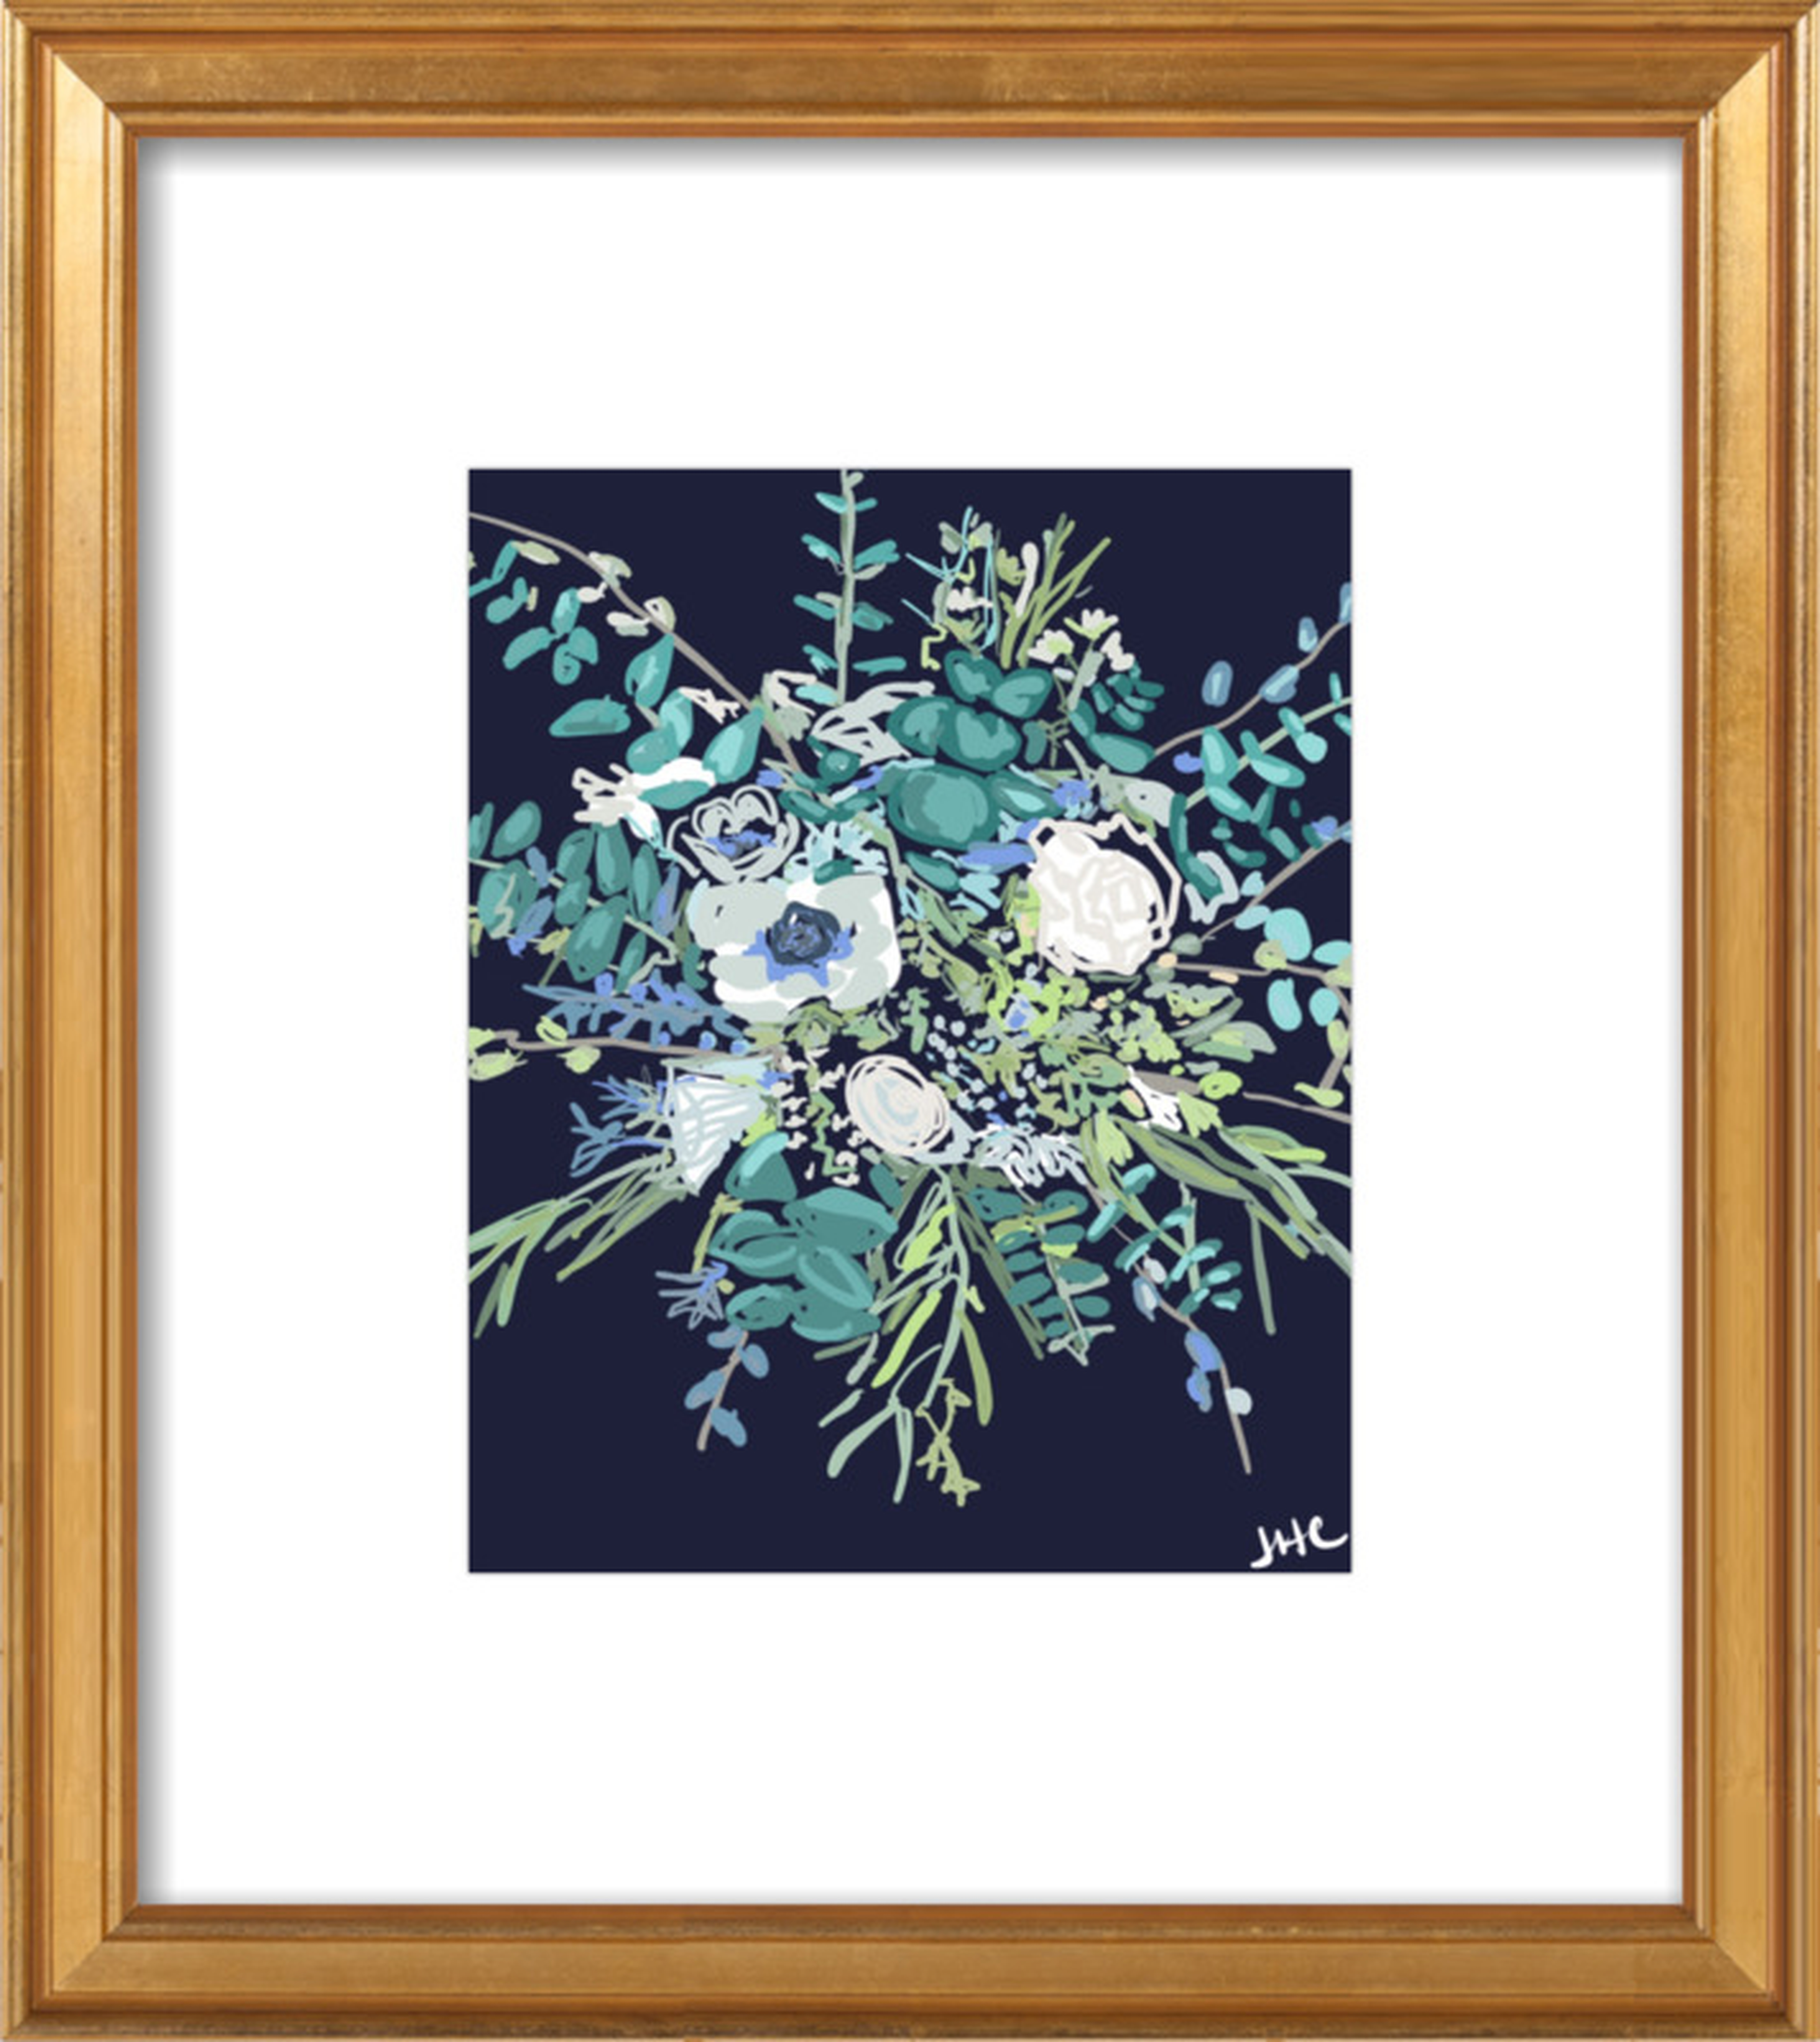 Flowers for Jenny by Jamie Corley for Artfully Walls - Artfully Walls